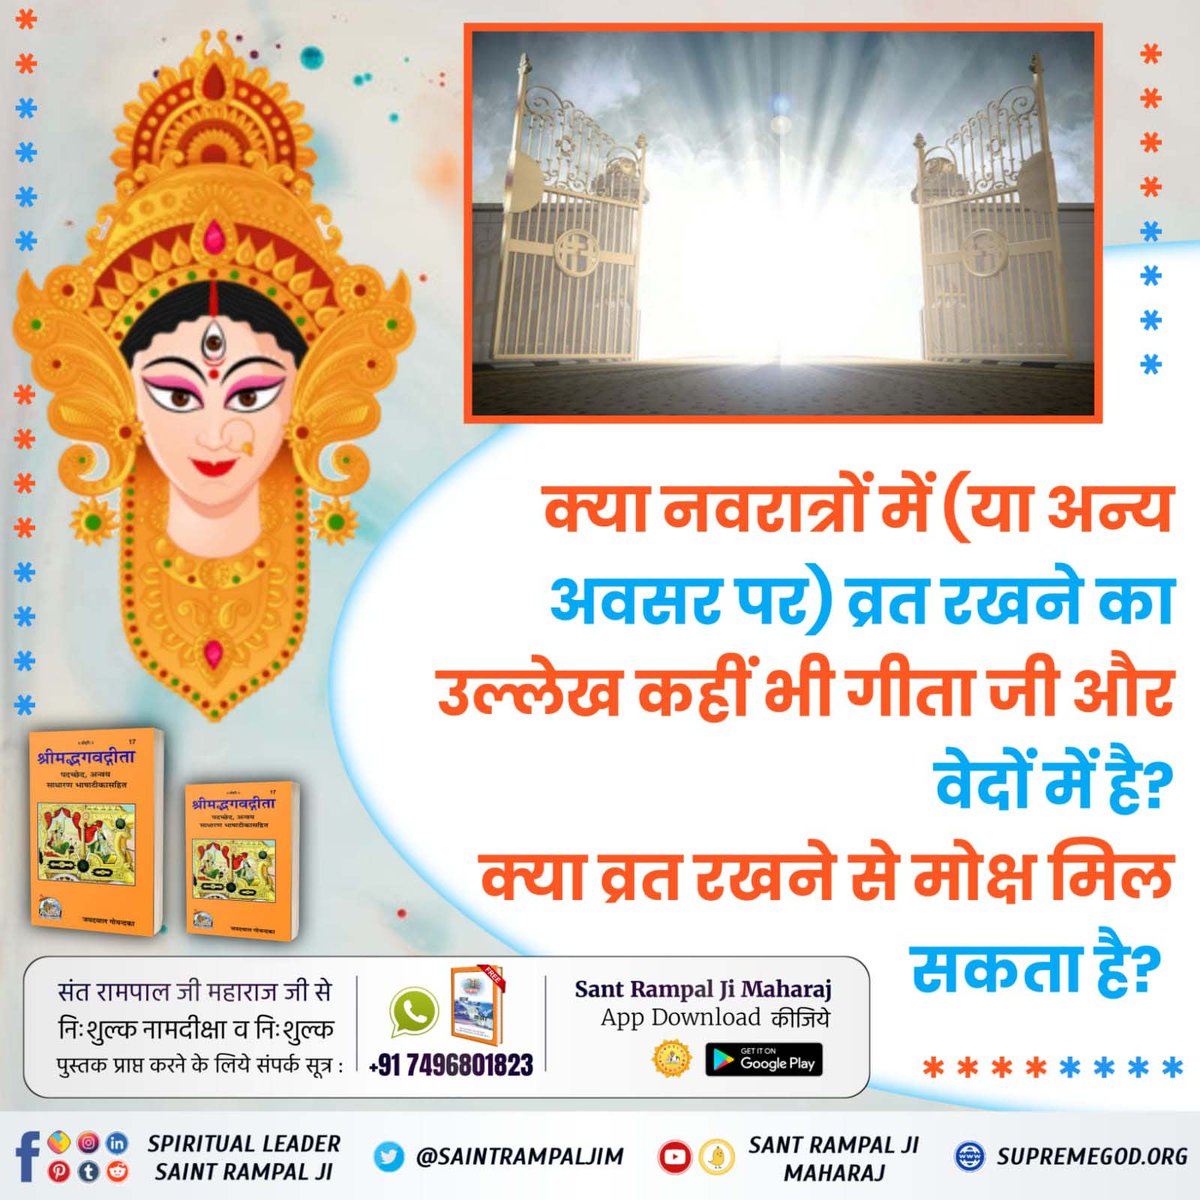 #माँ_को_खुश_करनेकेलिए पढ़ें ज्ञान गंगा
IS FASTING DURING
NAVRATRI
as per the scriptures?
To know more must read the previous book 'Gyan Ganga'